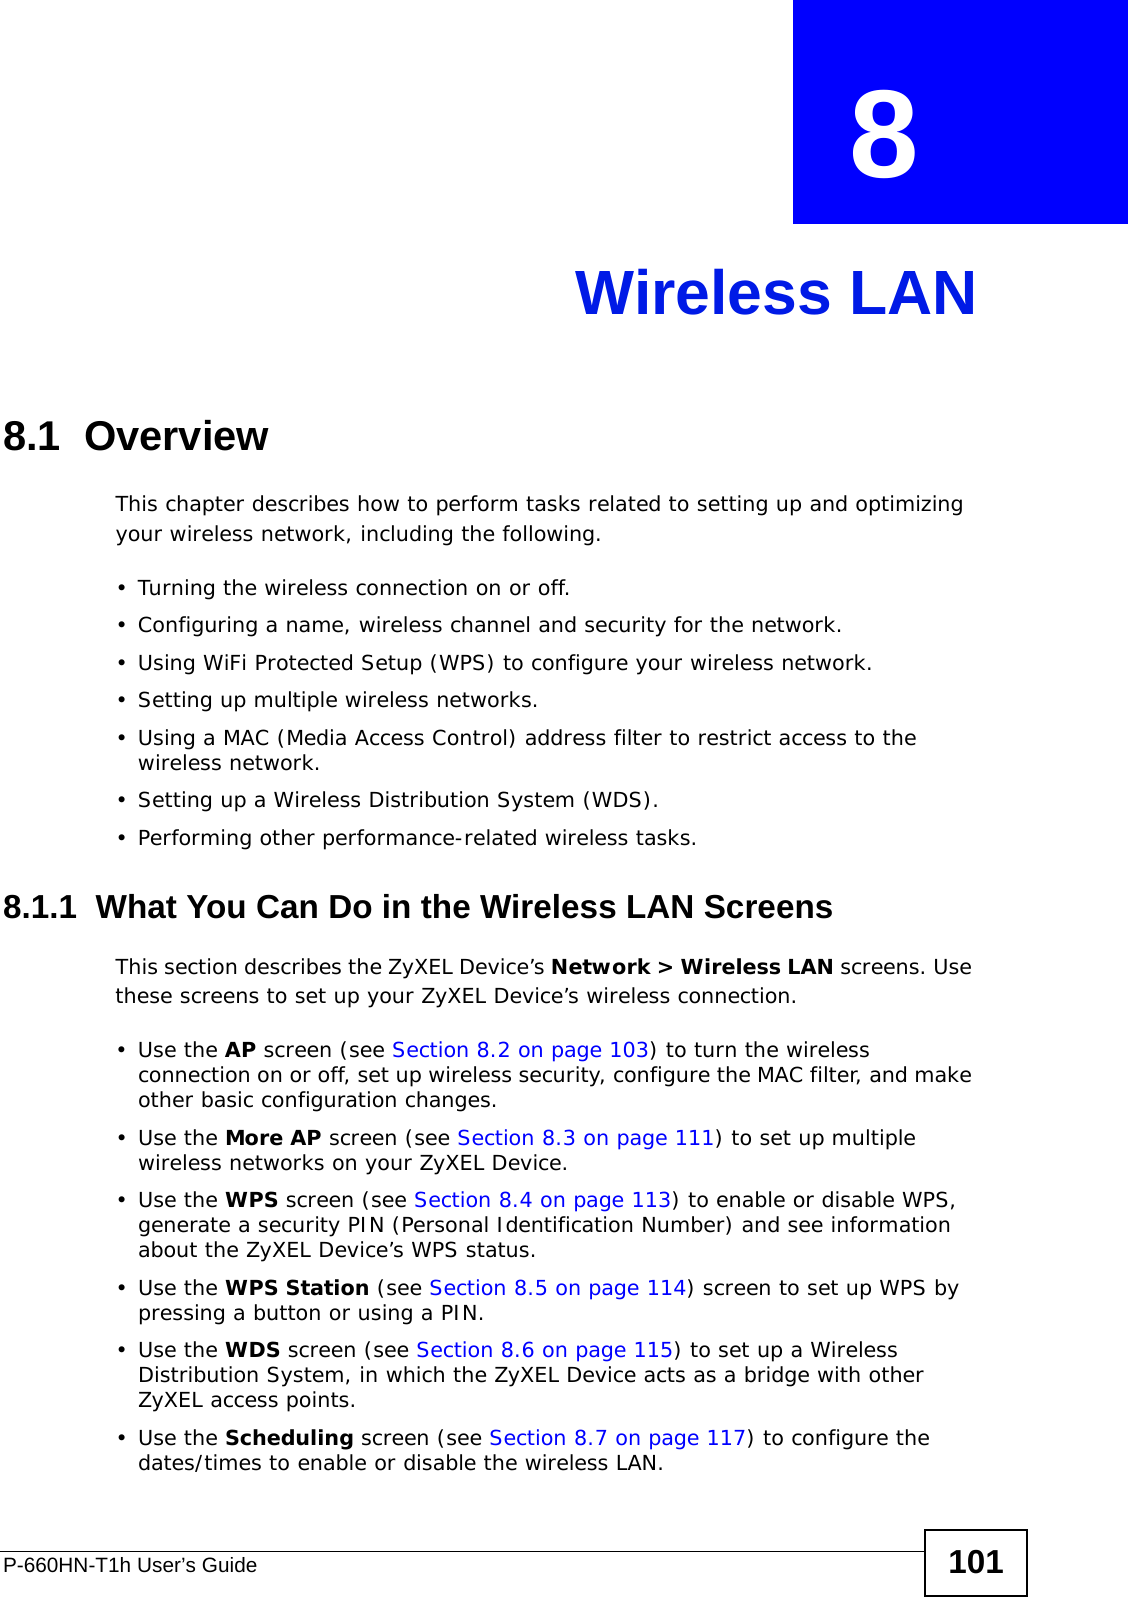 P-660HN-T1h User’s Guide 101CHAPTER  8 Wireless LAN8.1  Overview This chapter describes how to perform tasks related to setting up and optimizing your wireless network, including the following.• Turning the wireless connection on or off.• Configuring a name, wireless channel and security for the network.• Using WiFi Protected Setup (WPS) to configure your wireless network.• Setting up multiple wireless networks.• Using a MAC (Media Access Control) address filter to restrict access to the wireless network.• Setting up a Wireless Distribution System (WDS).• Performing other performance-related wireless tasks.8.1.1  What You Can Do in the Wireless LAN ScreensThis section describes the ZyXEL Device’s Network &gt; Wireless LAN screens. Use these screens to set up your ZyXEL Device’s wireless connection.•Use the AP screen (see Section 8.2 on page 103) to turn the wireless connection on or off, set up wireless security, configure the MAC filter, and make other basic configuration changes.•Use the More AP screen (see Section 8.3 on page 111) to set up multiple wireless networks on your ZyXEL Device.•Use the WPS screen (see Section 8.4 on page 113) to enable or disable WPS, generate a security PIN (Personal Identification Number) and see information about the ZyXEL Device’s WPS status.•Use the WPS Station (see Section 8.5 on page 114) screen to set up WPS by pressing a button or using a PIN.•Use the WDS screen (see Section 8.6 on page 115) to set up a Wireless Distribution System, in which the ZyXEL Device acts as a bridge with other ZyXEL access points.•Use the Scheduling screen (see Section 8.7 on page 117) to configure the dates/times to enable or disable the wireless LAN.